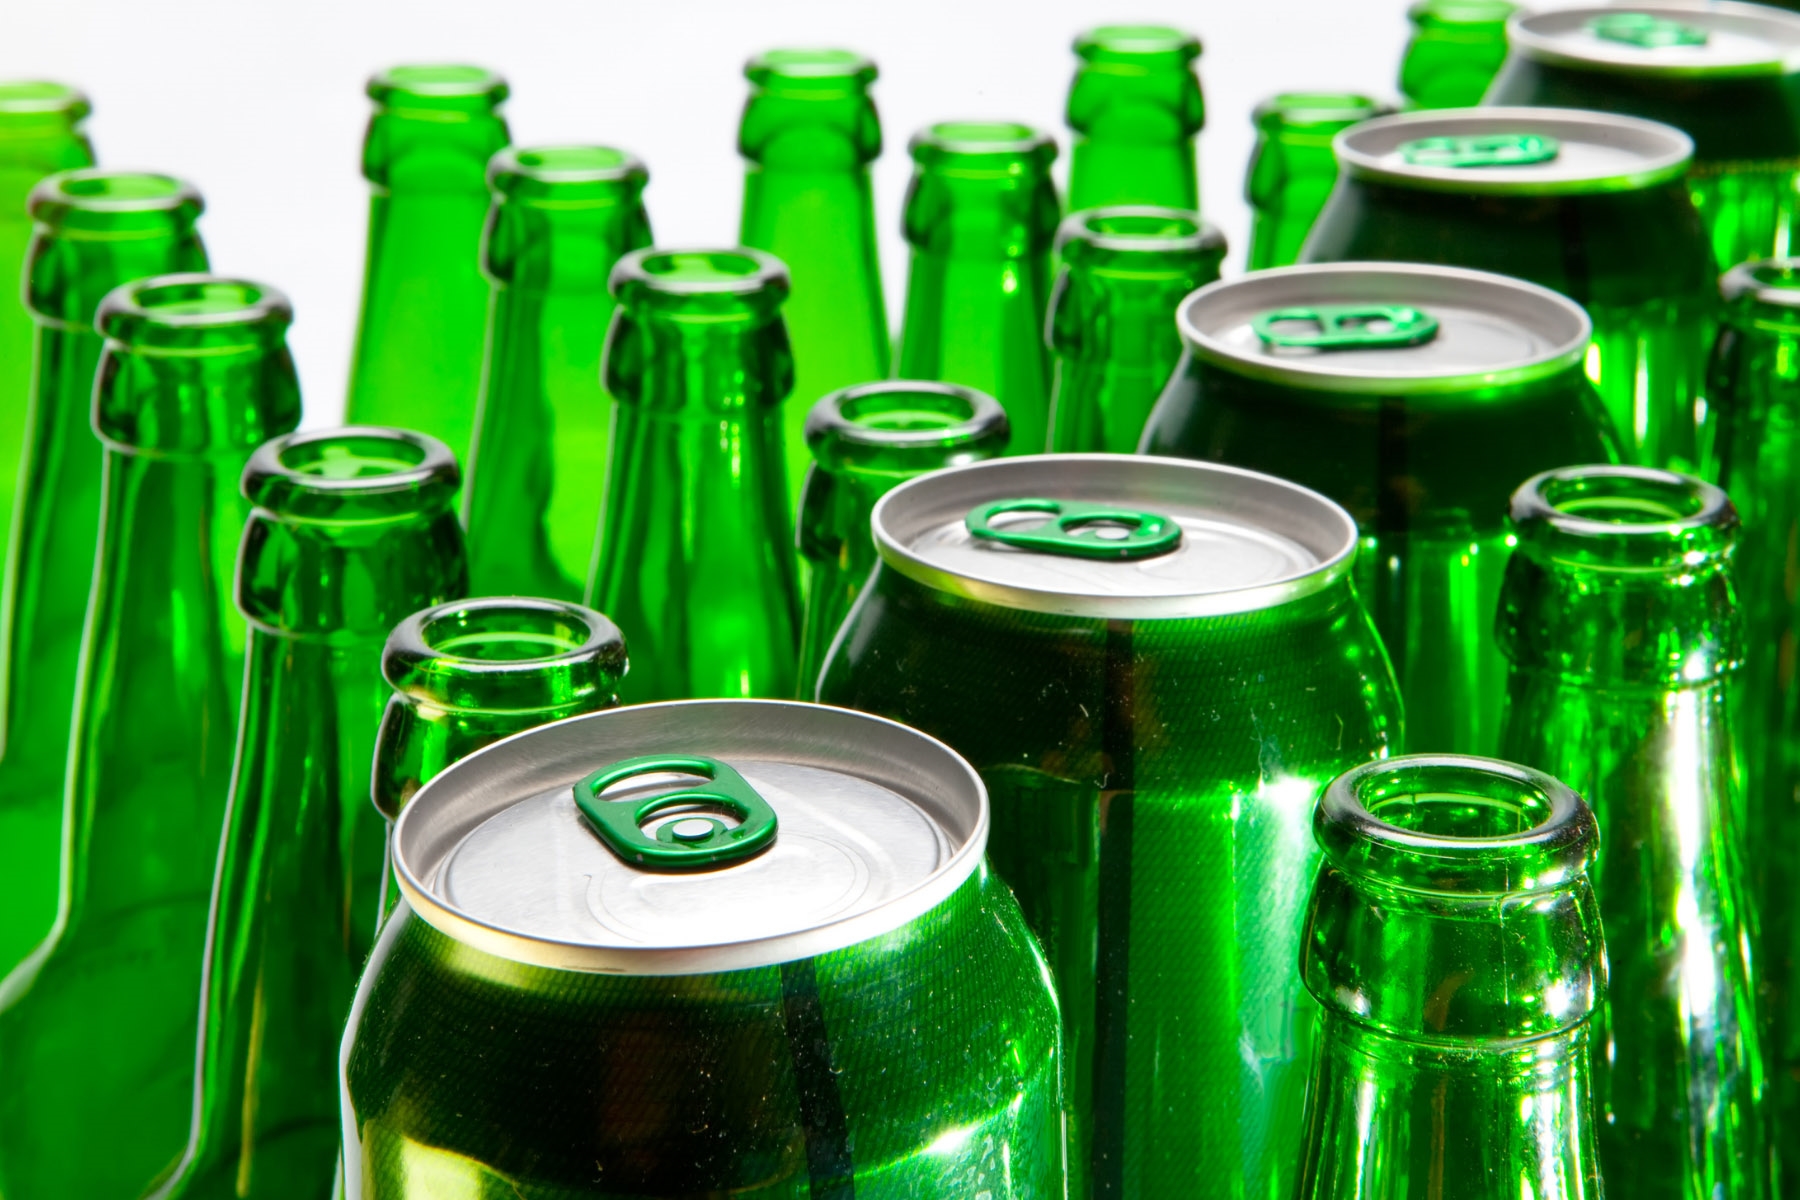 Green bottles and cans close up